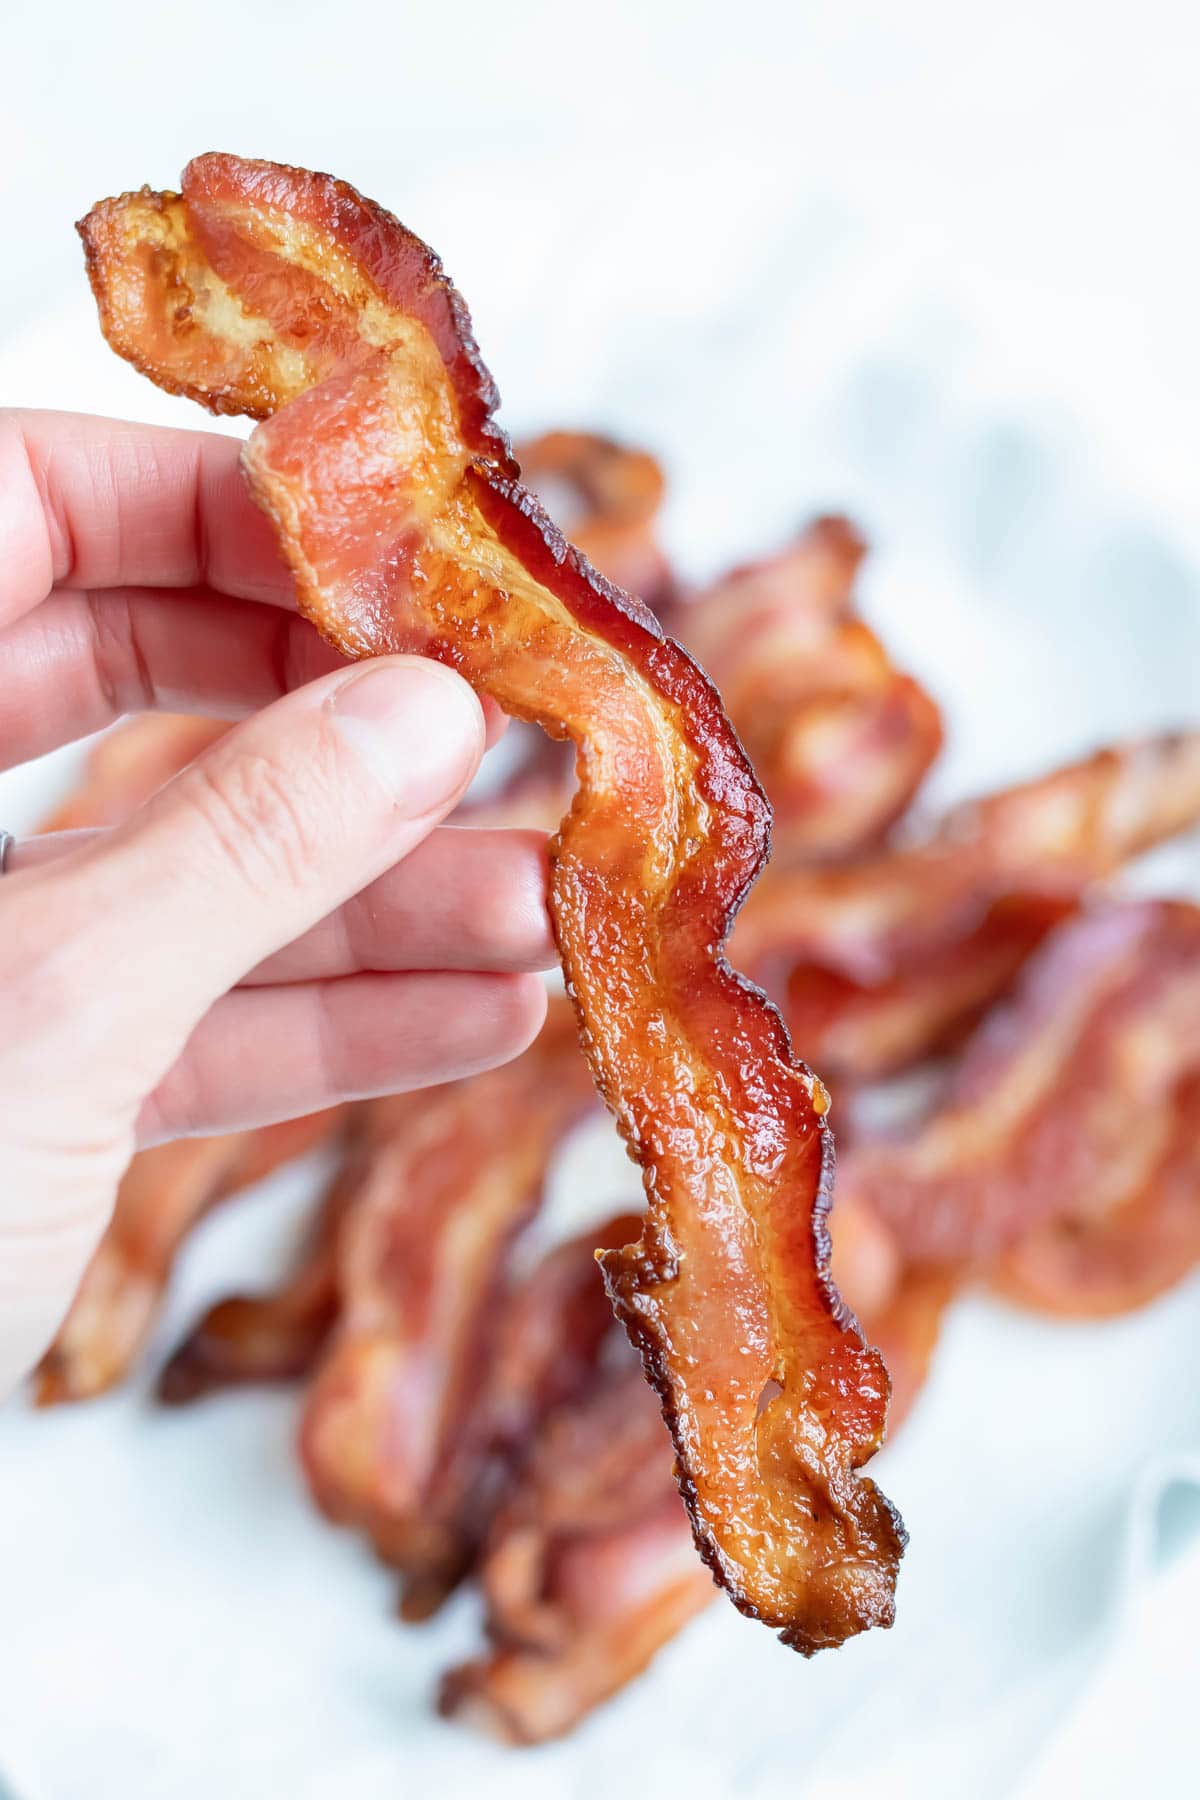 A hand lifts up slice of cooked bacon.